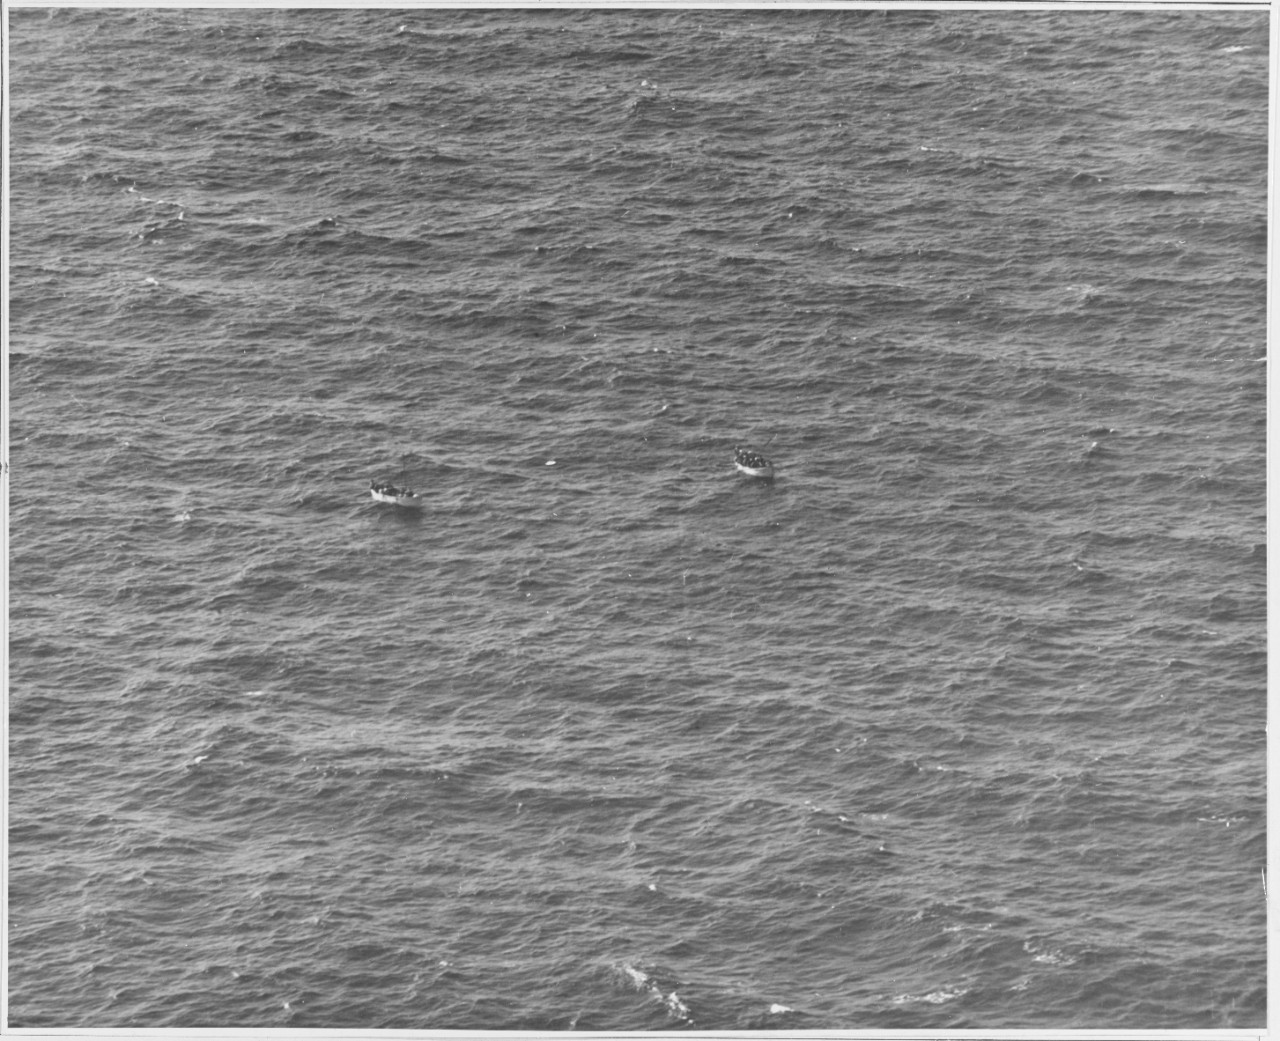 Two life boats sighted at sea (unidentified)